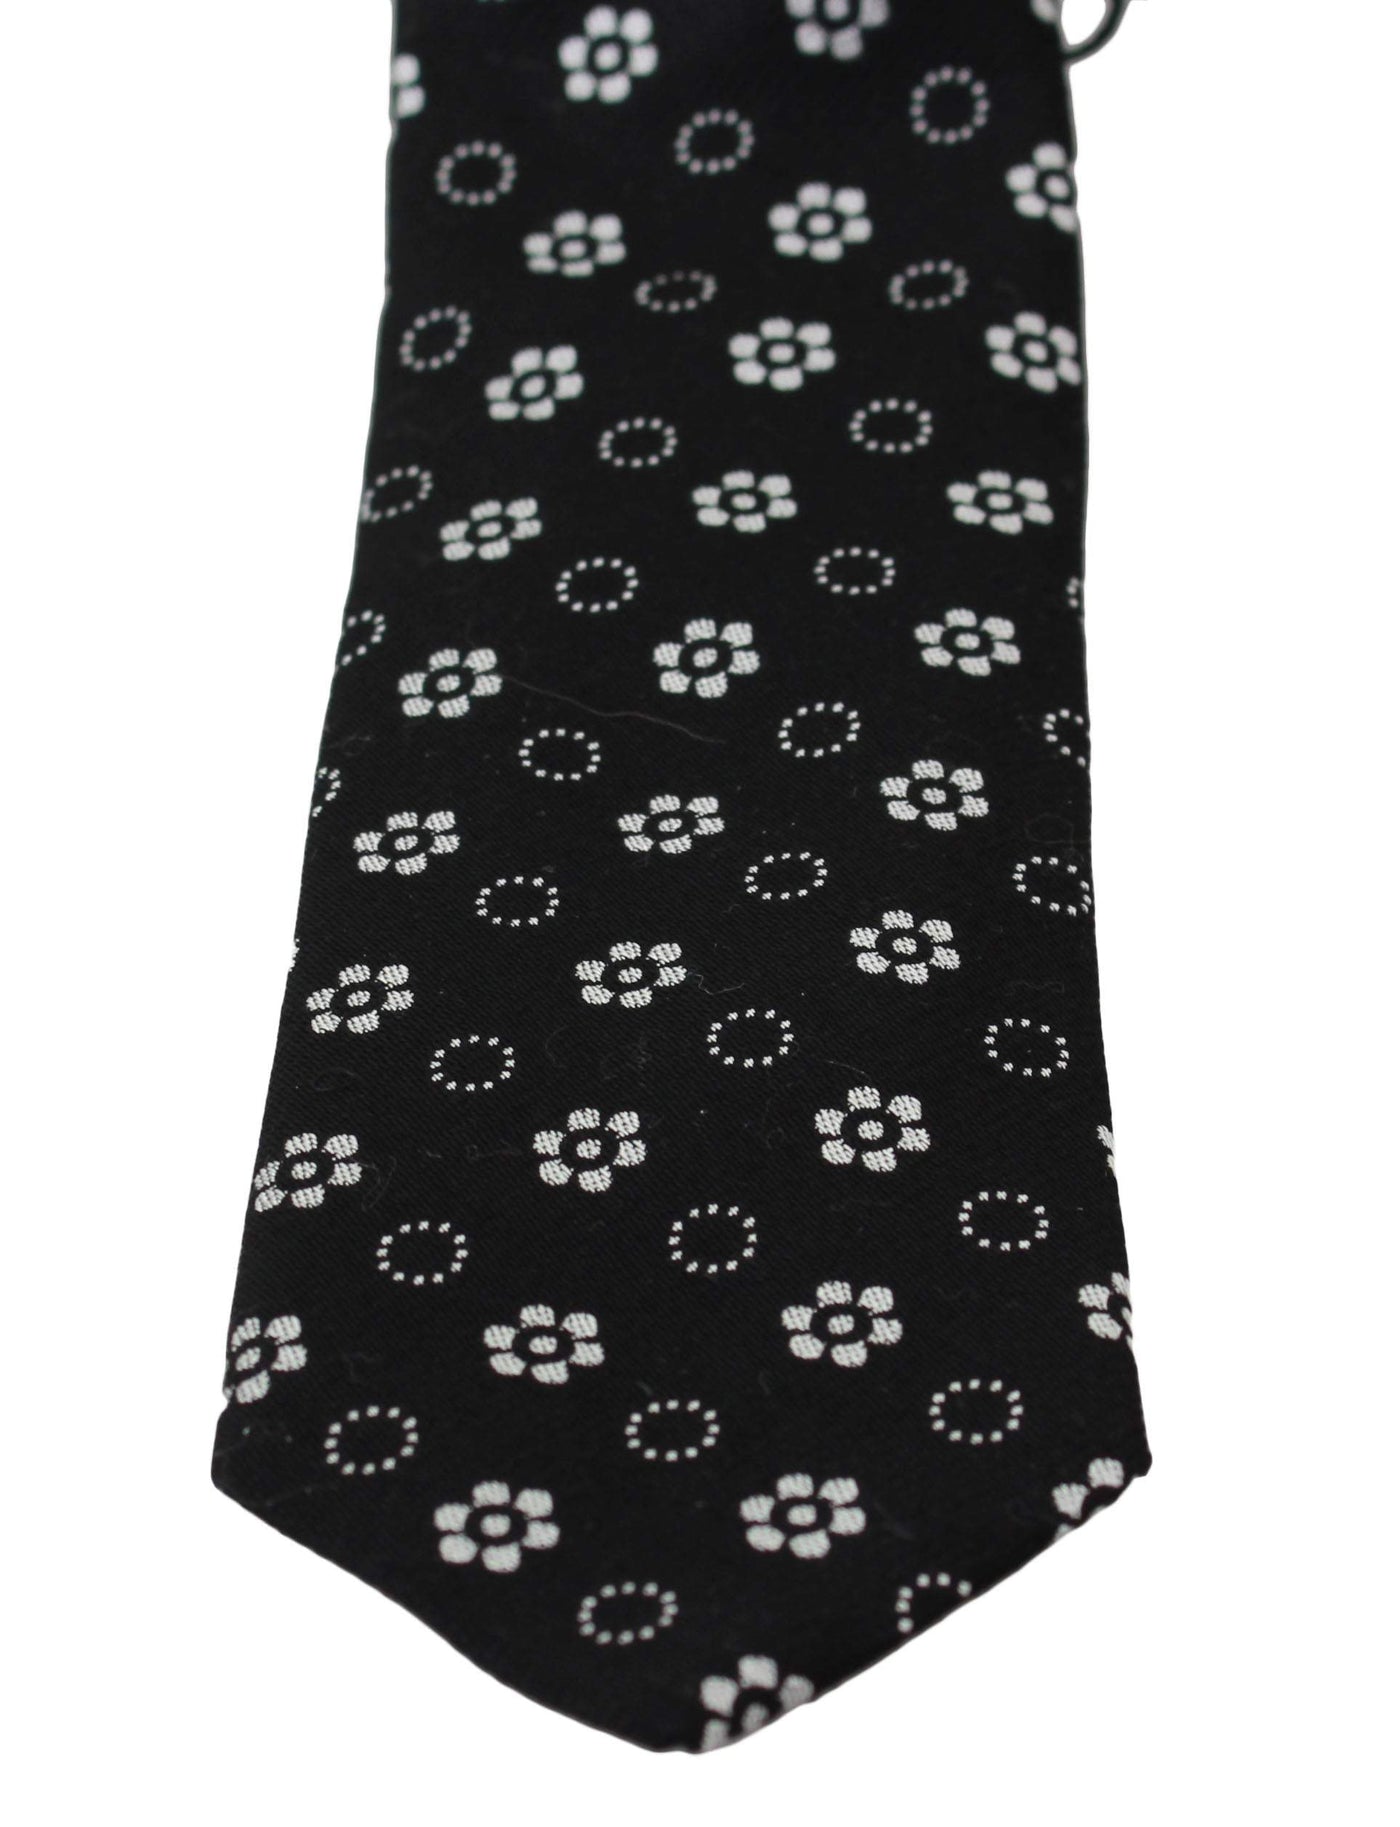 Dolce & Gabbana Dolce & Gabbana Black 100% Silk Floral Print Print Classic Tie #men, Accessories - New Arrivals, Black, Dolce & Gabbana, feed-agegroup-adult, feed-color-black, feed-gender-male, Ties & Bowties - Men - Accessories at SEYMAYKA